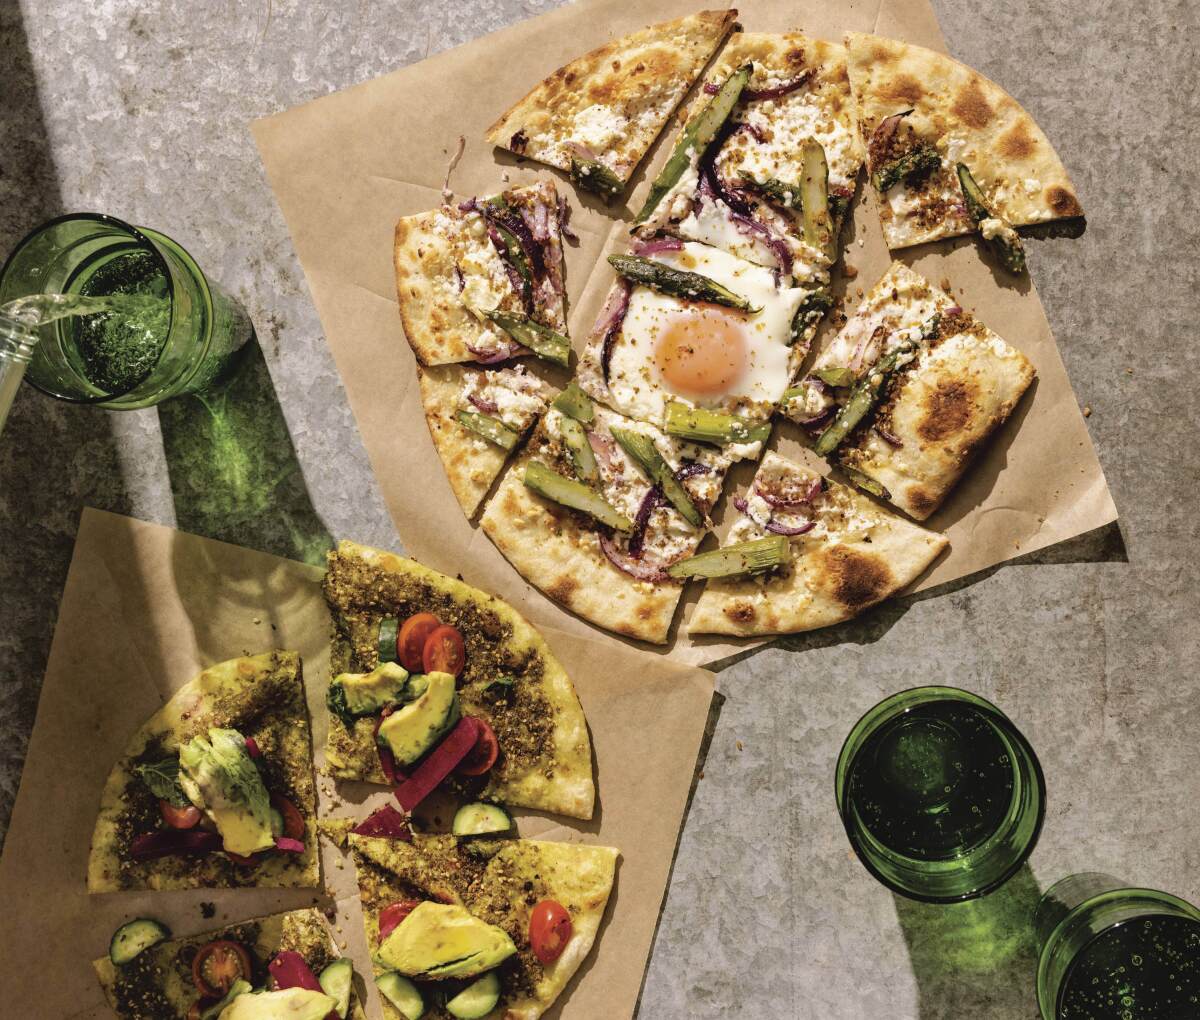 An overhead view of flatbread that's been sliced in pieces, with toppings including egg and avocado.